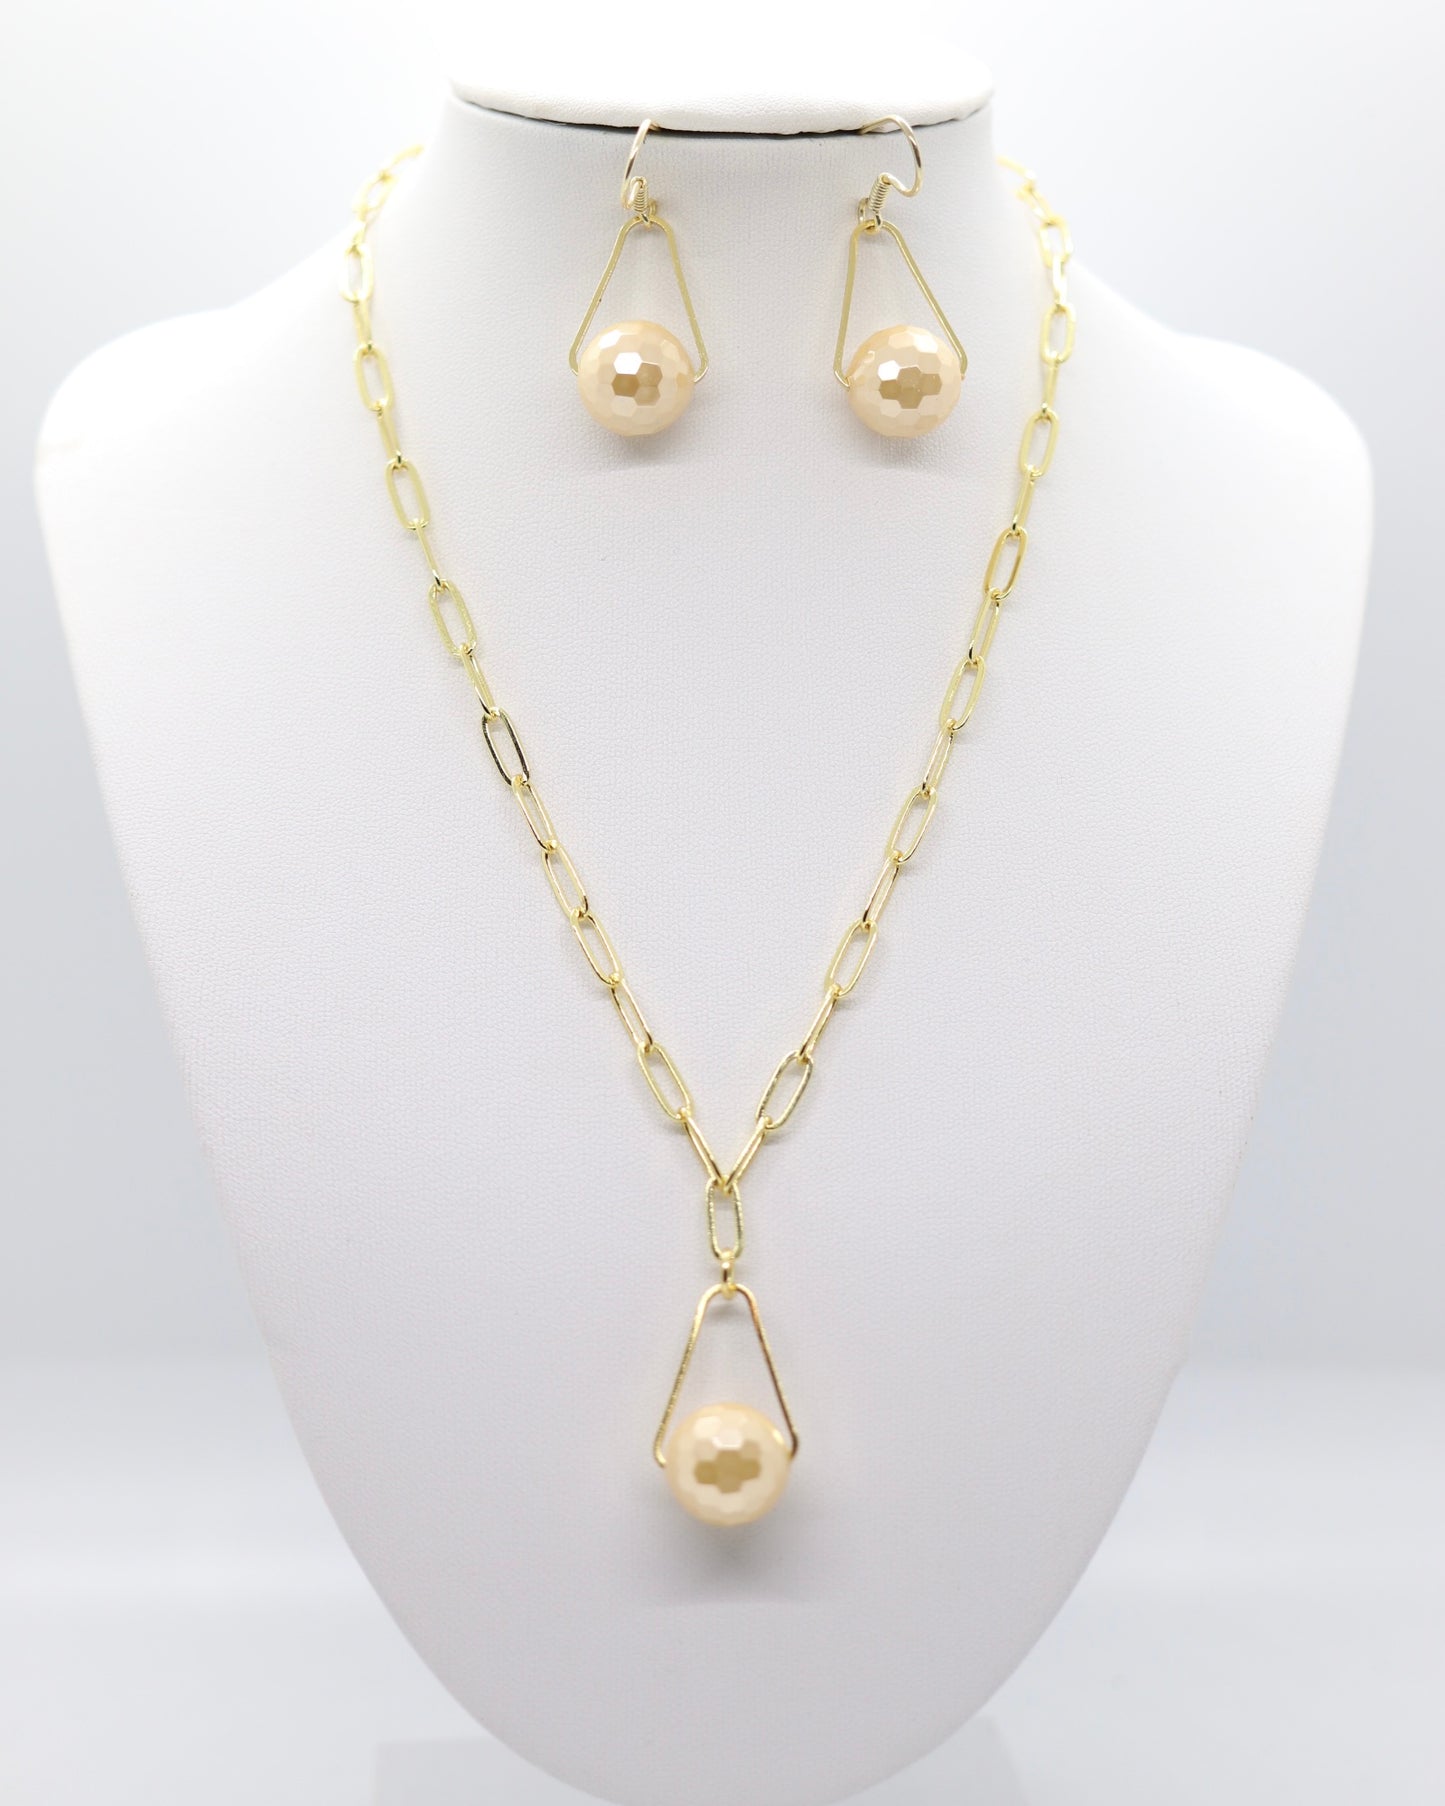 Gold Paperclip Chain with Gold Pearl Pendant and Gold Chain Pearl Earrings